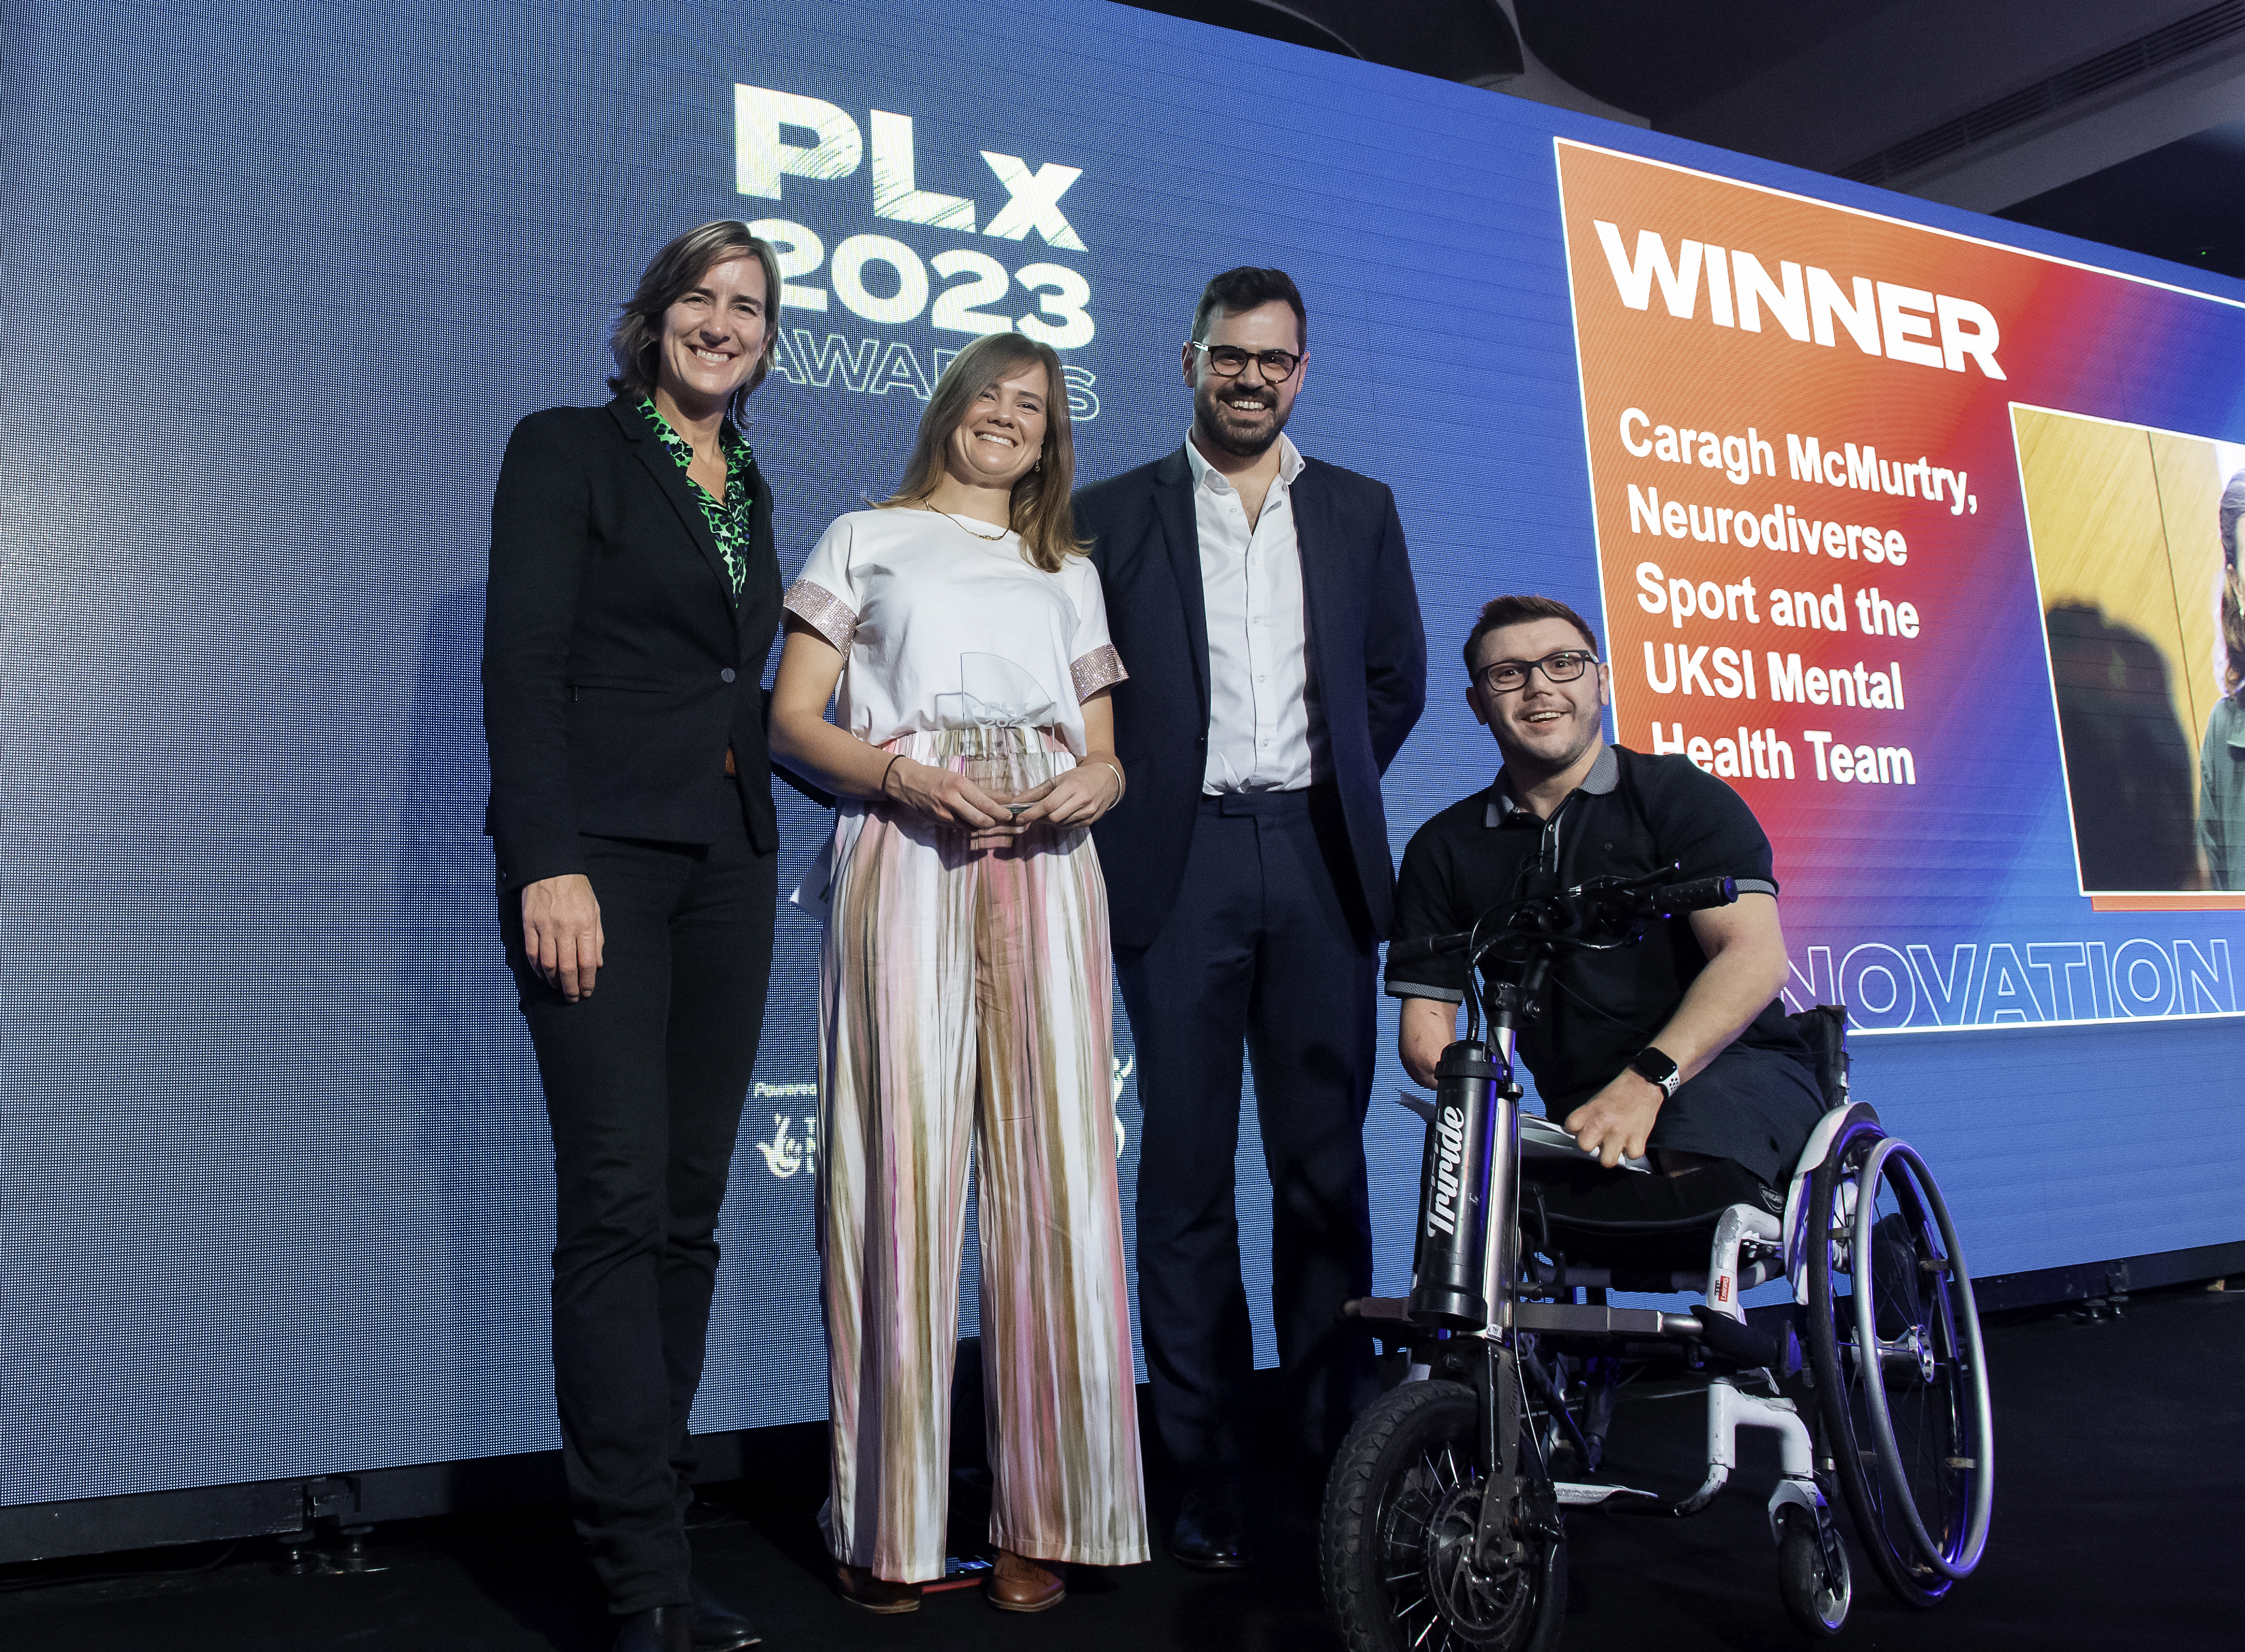 McMurtry was the recipient of the , Caragh won the Innovation Award at the PLx Awards, hosted by UK Sport 